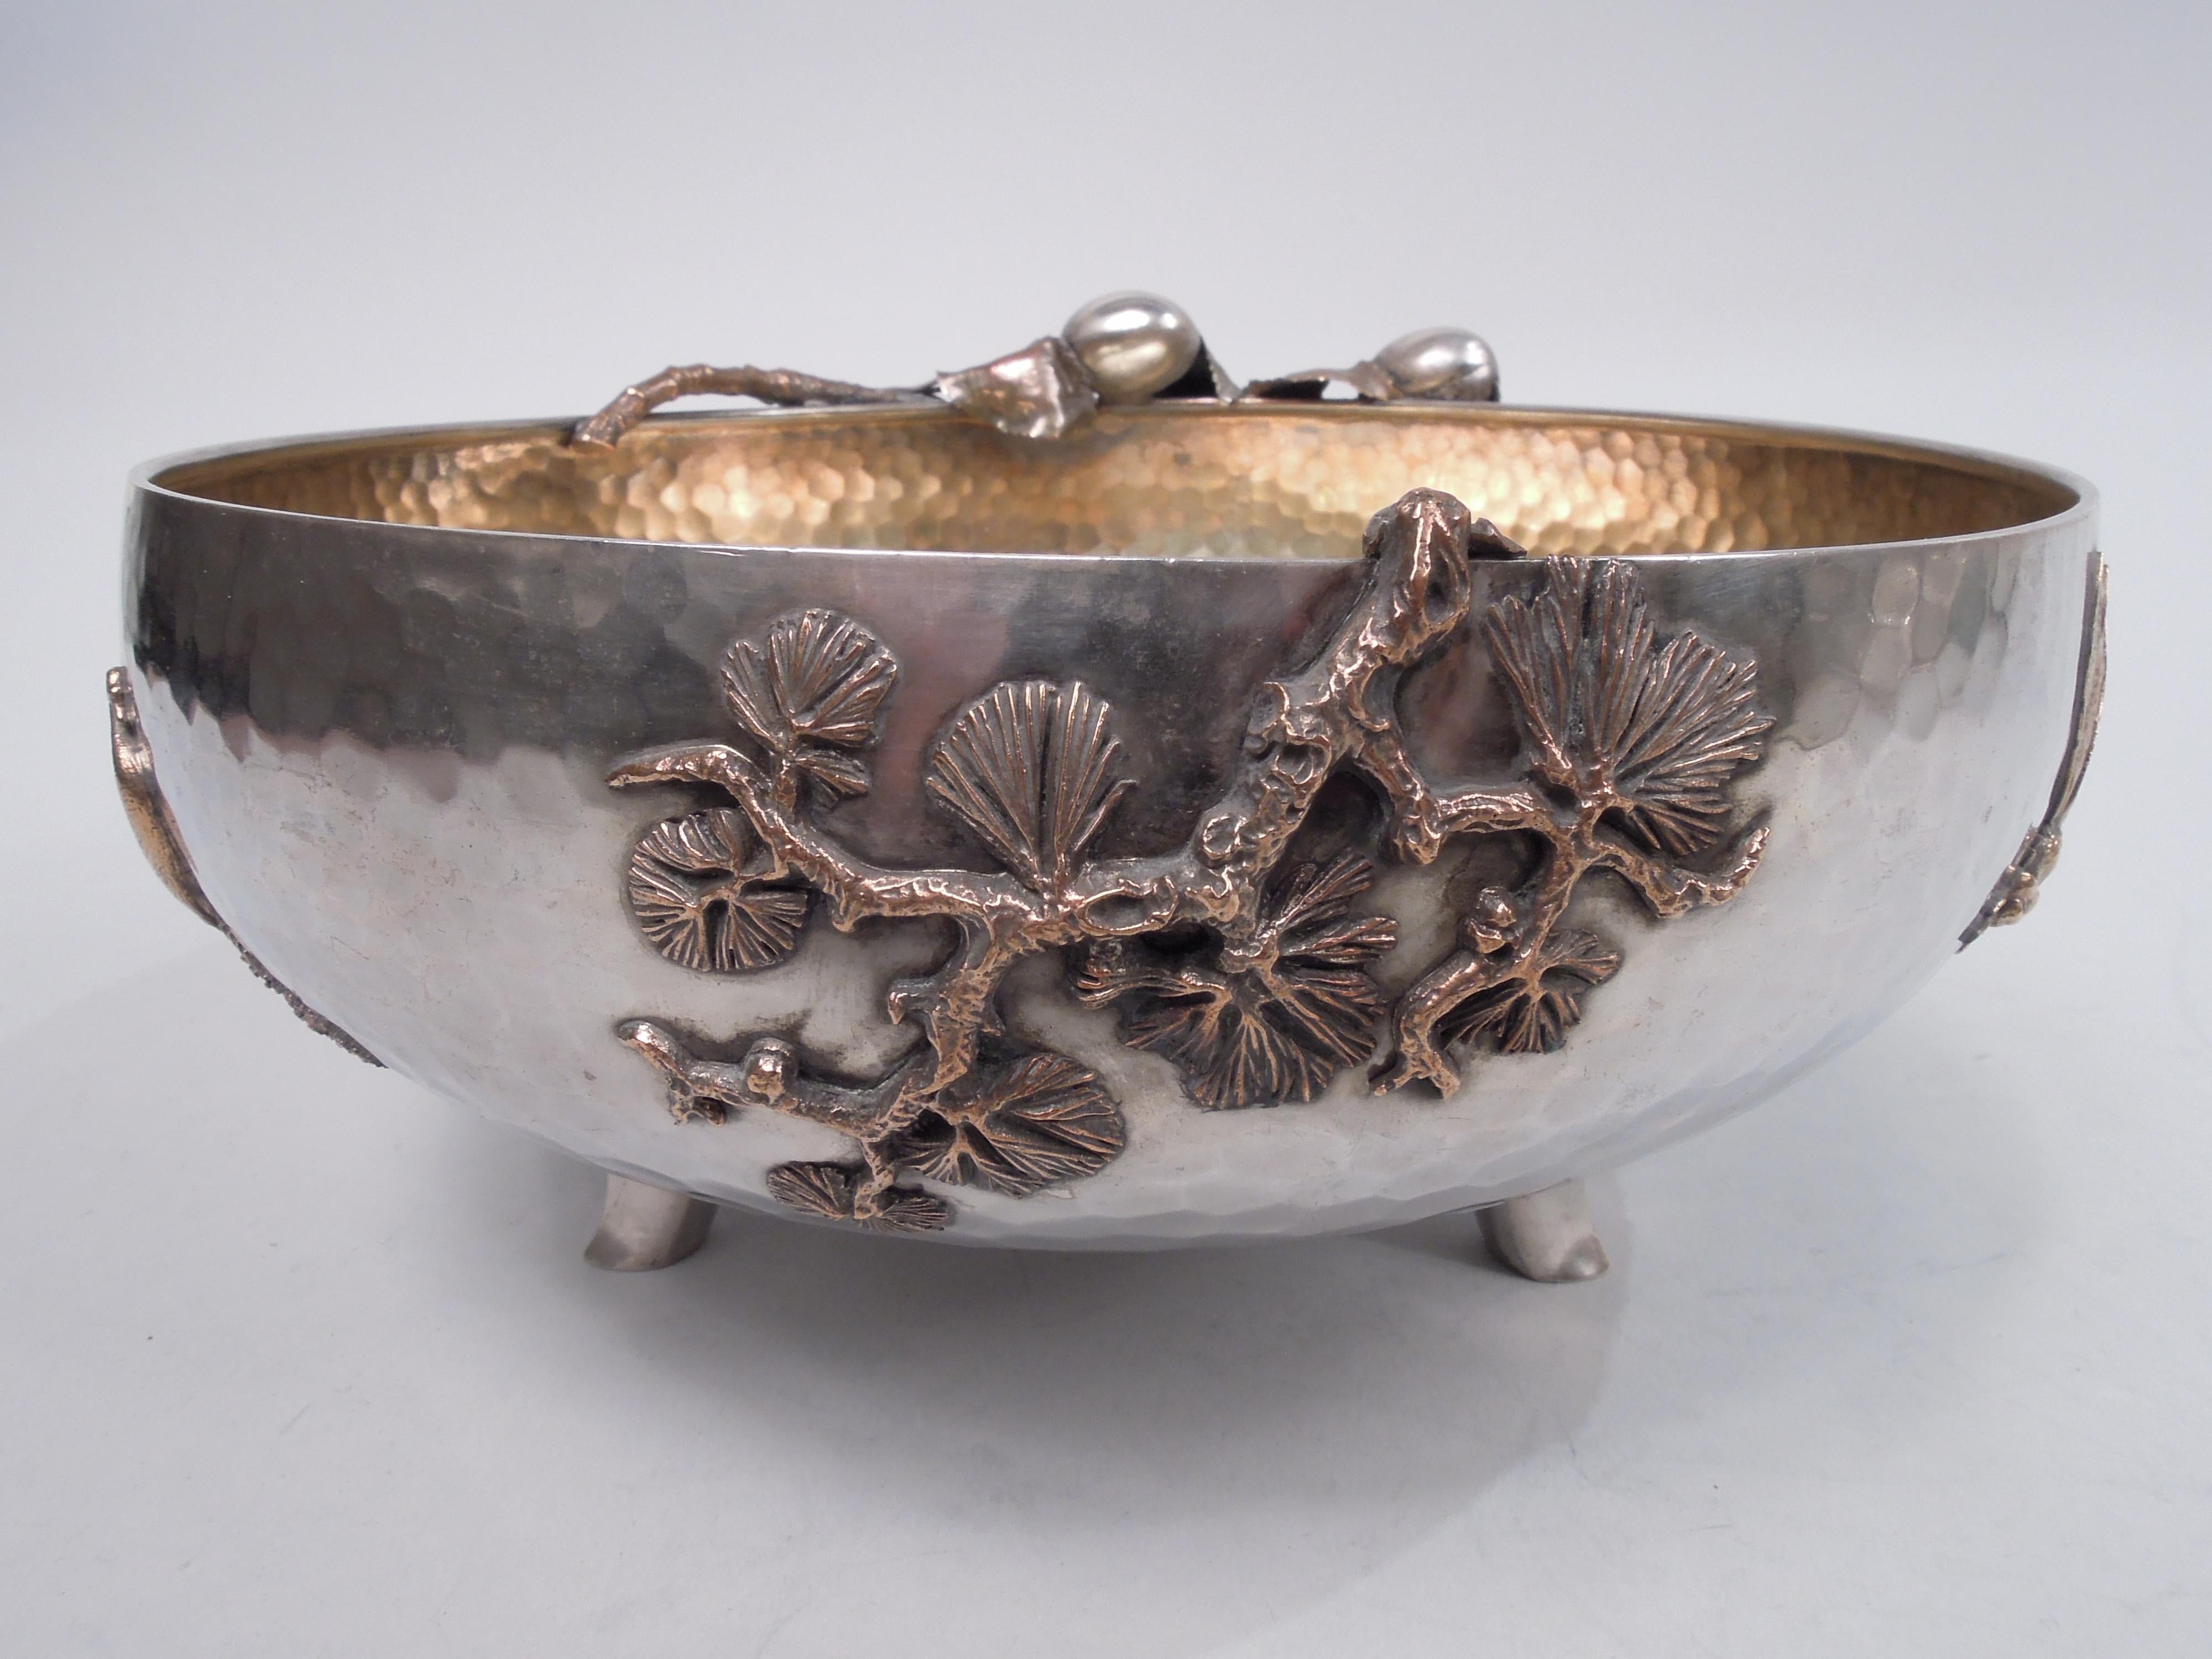 American Gorham Japonesque Hand-Hammered Mixed Metal Dragonfly Bowl, 1883 For Sale